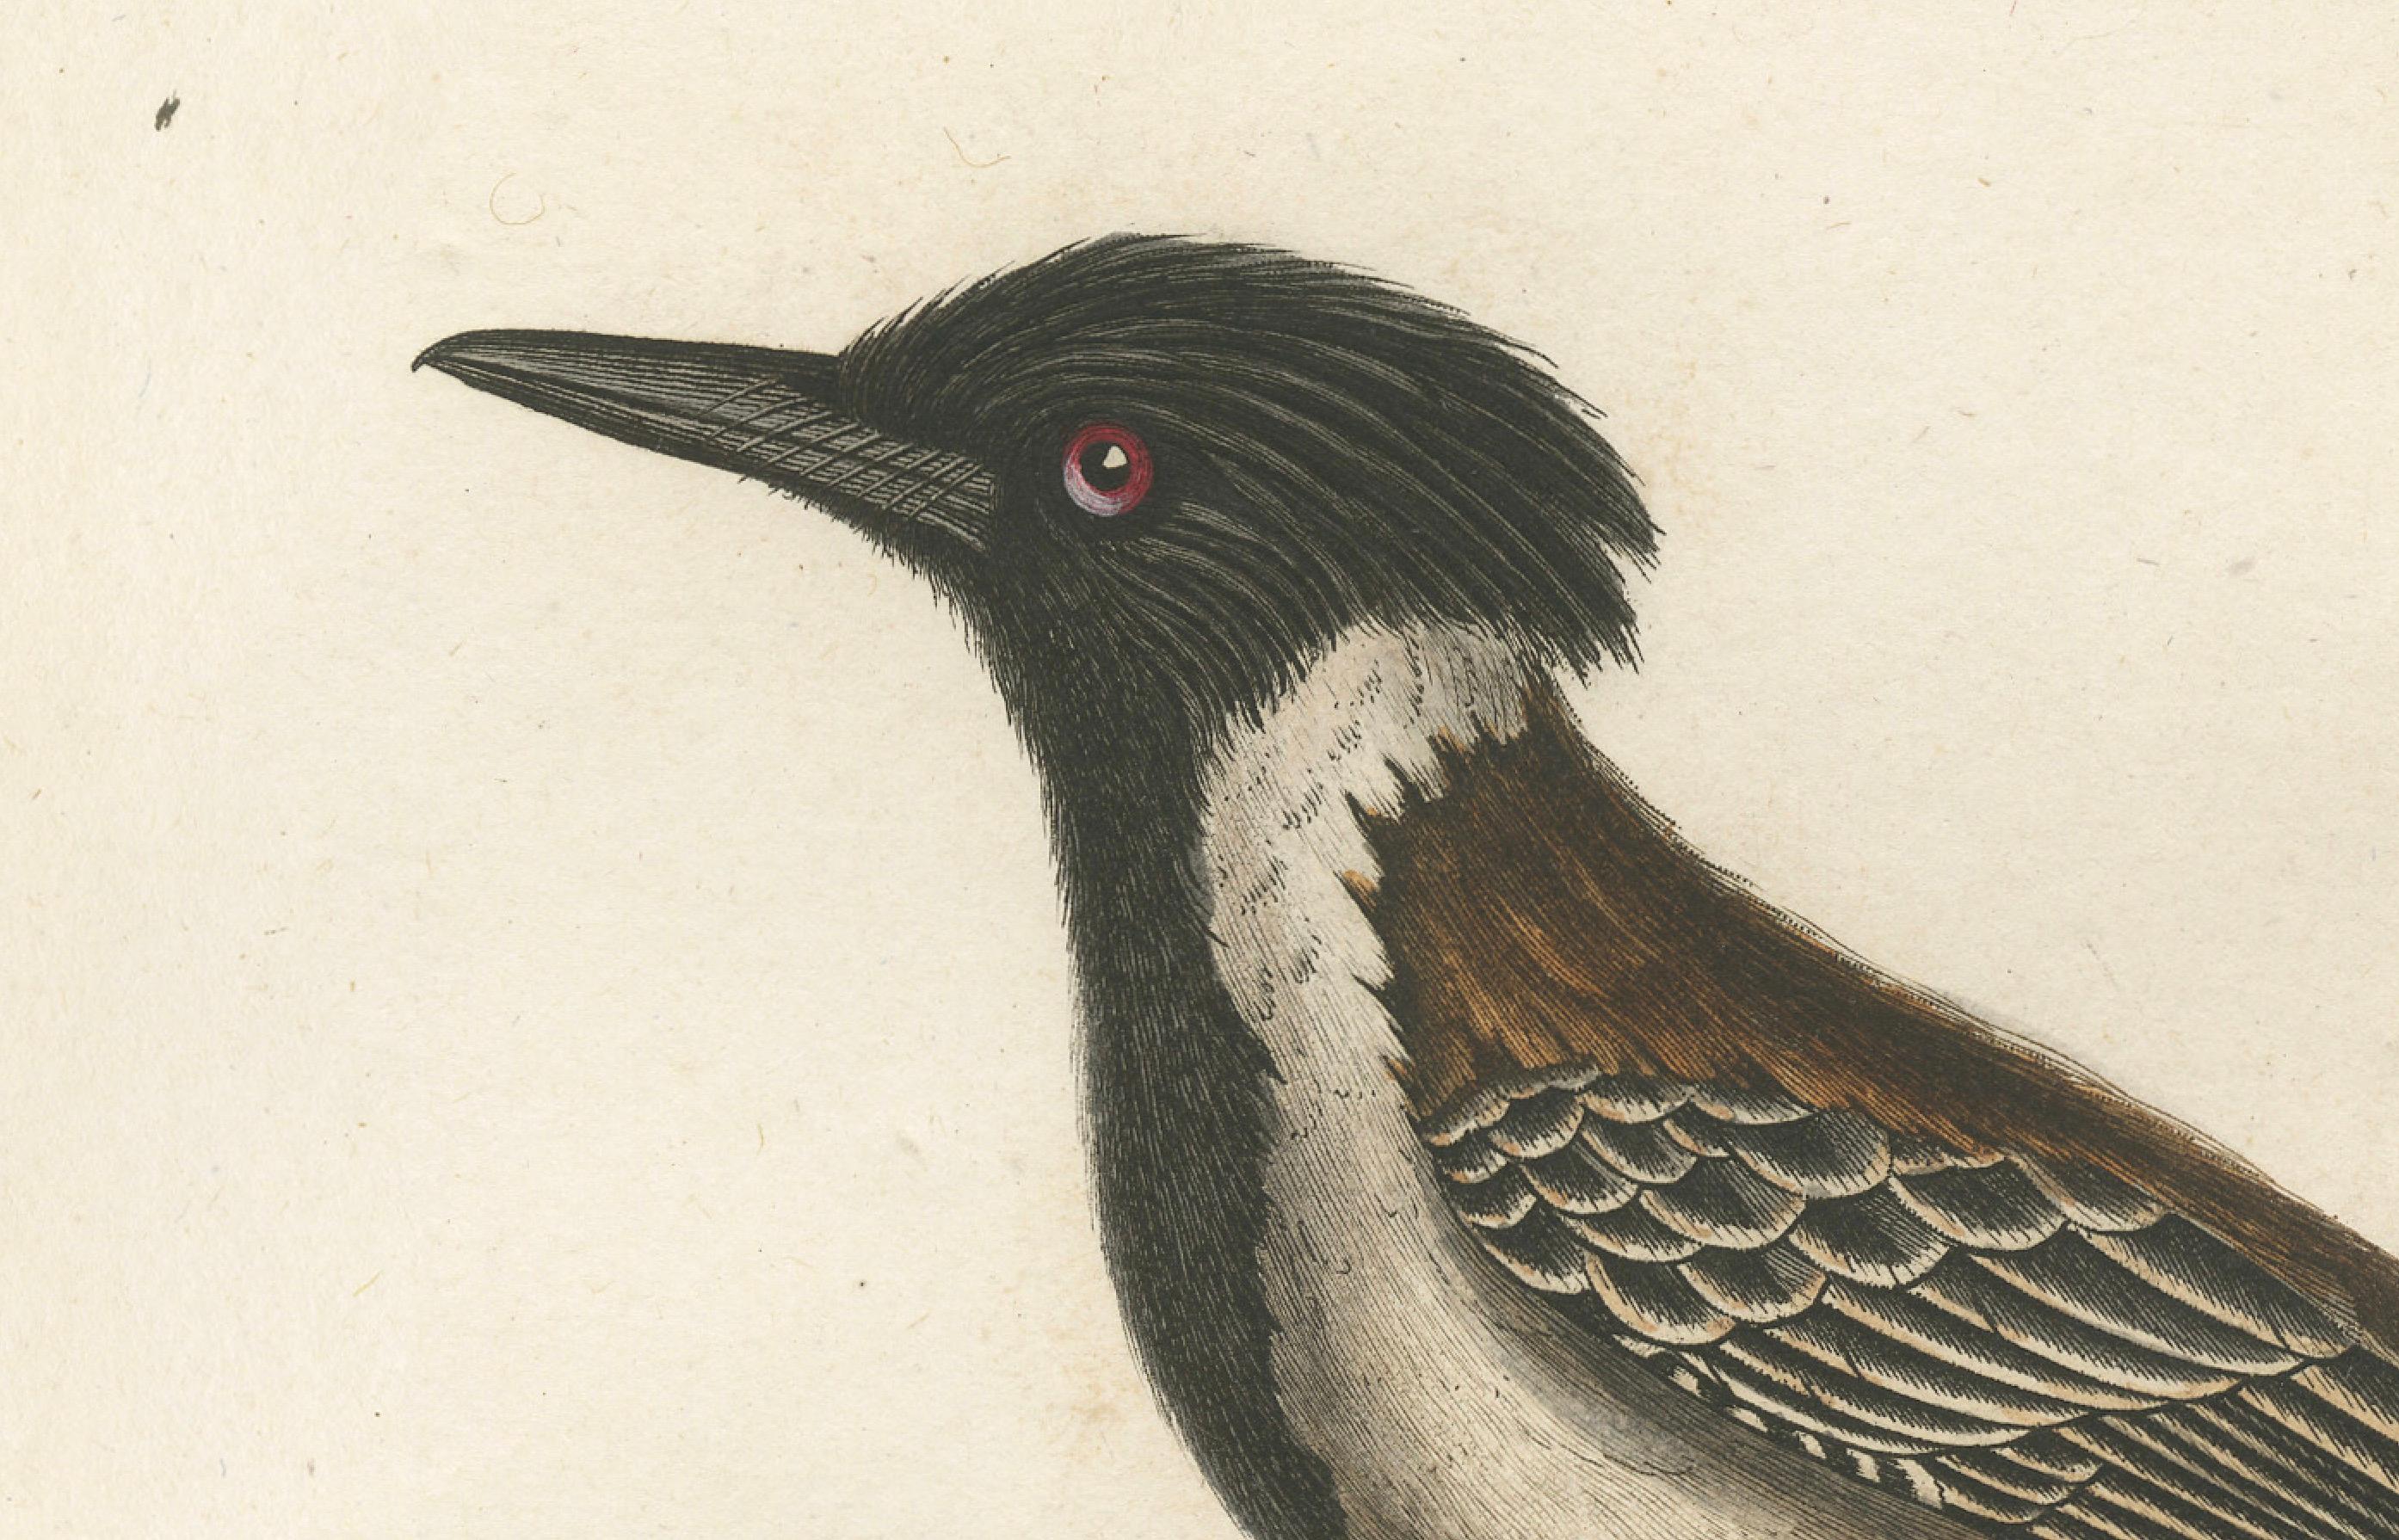 This print, titled 'Le Tyran à huppe noire', represents the Eastern Kingbird (Tyrannus tyrannus). The bird is depicted perched on a branch, rendered in a profile view that showcases its prominent crest and striking plumage. The artwork captures the